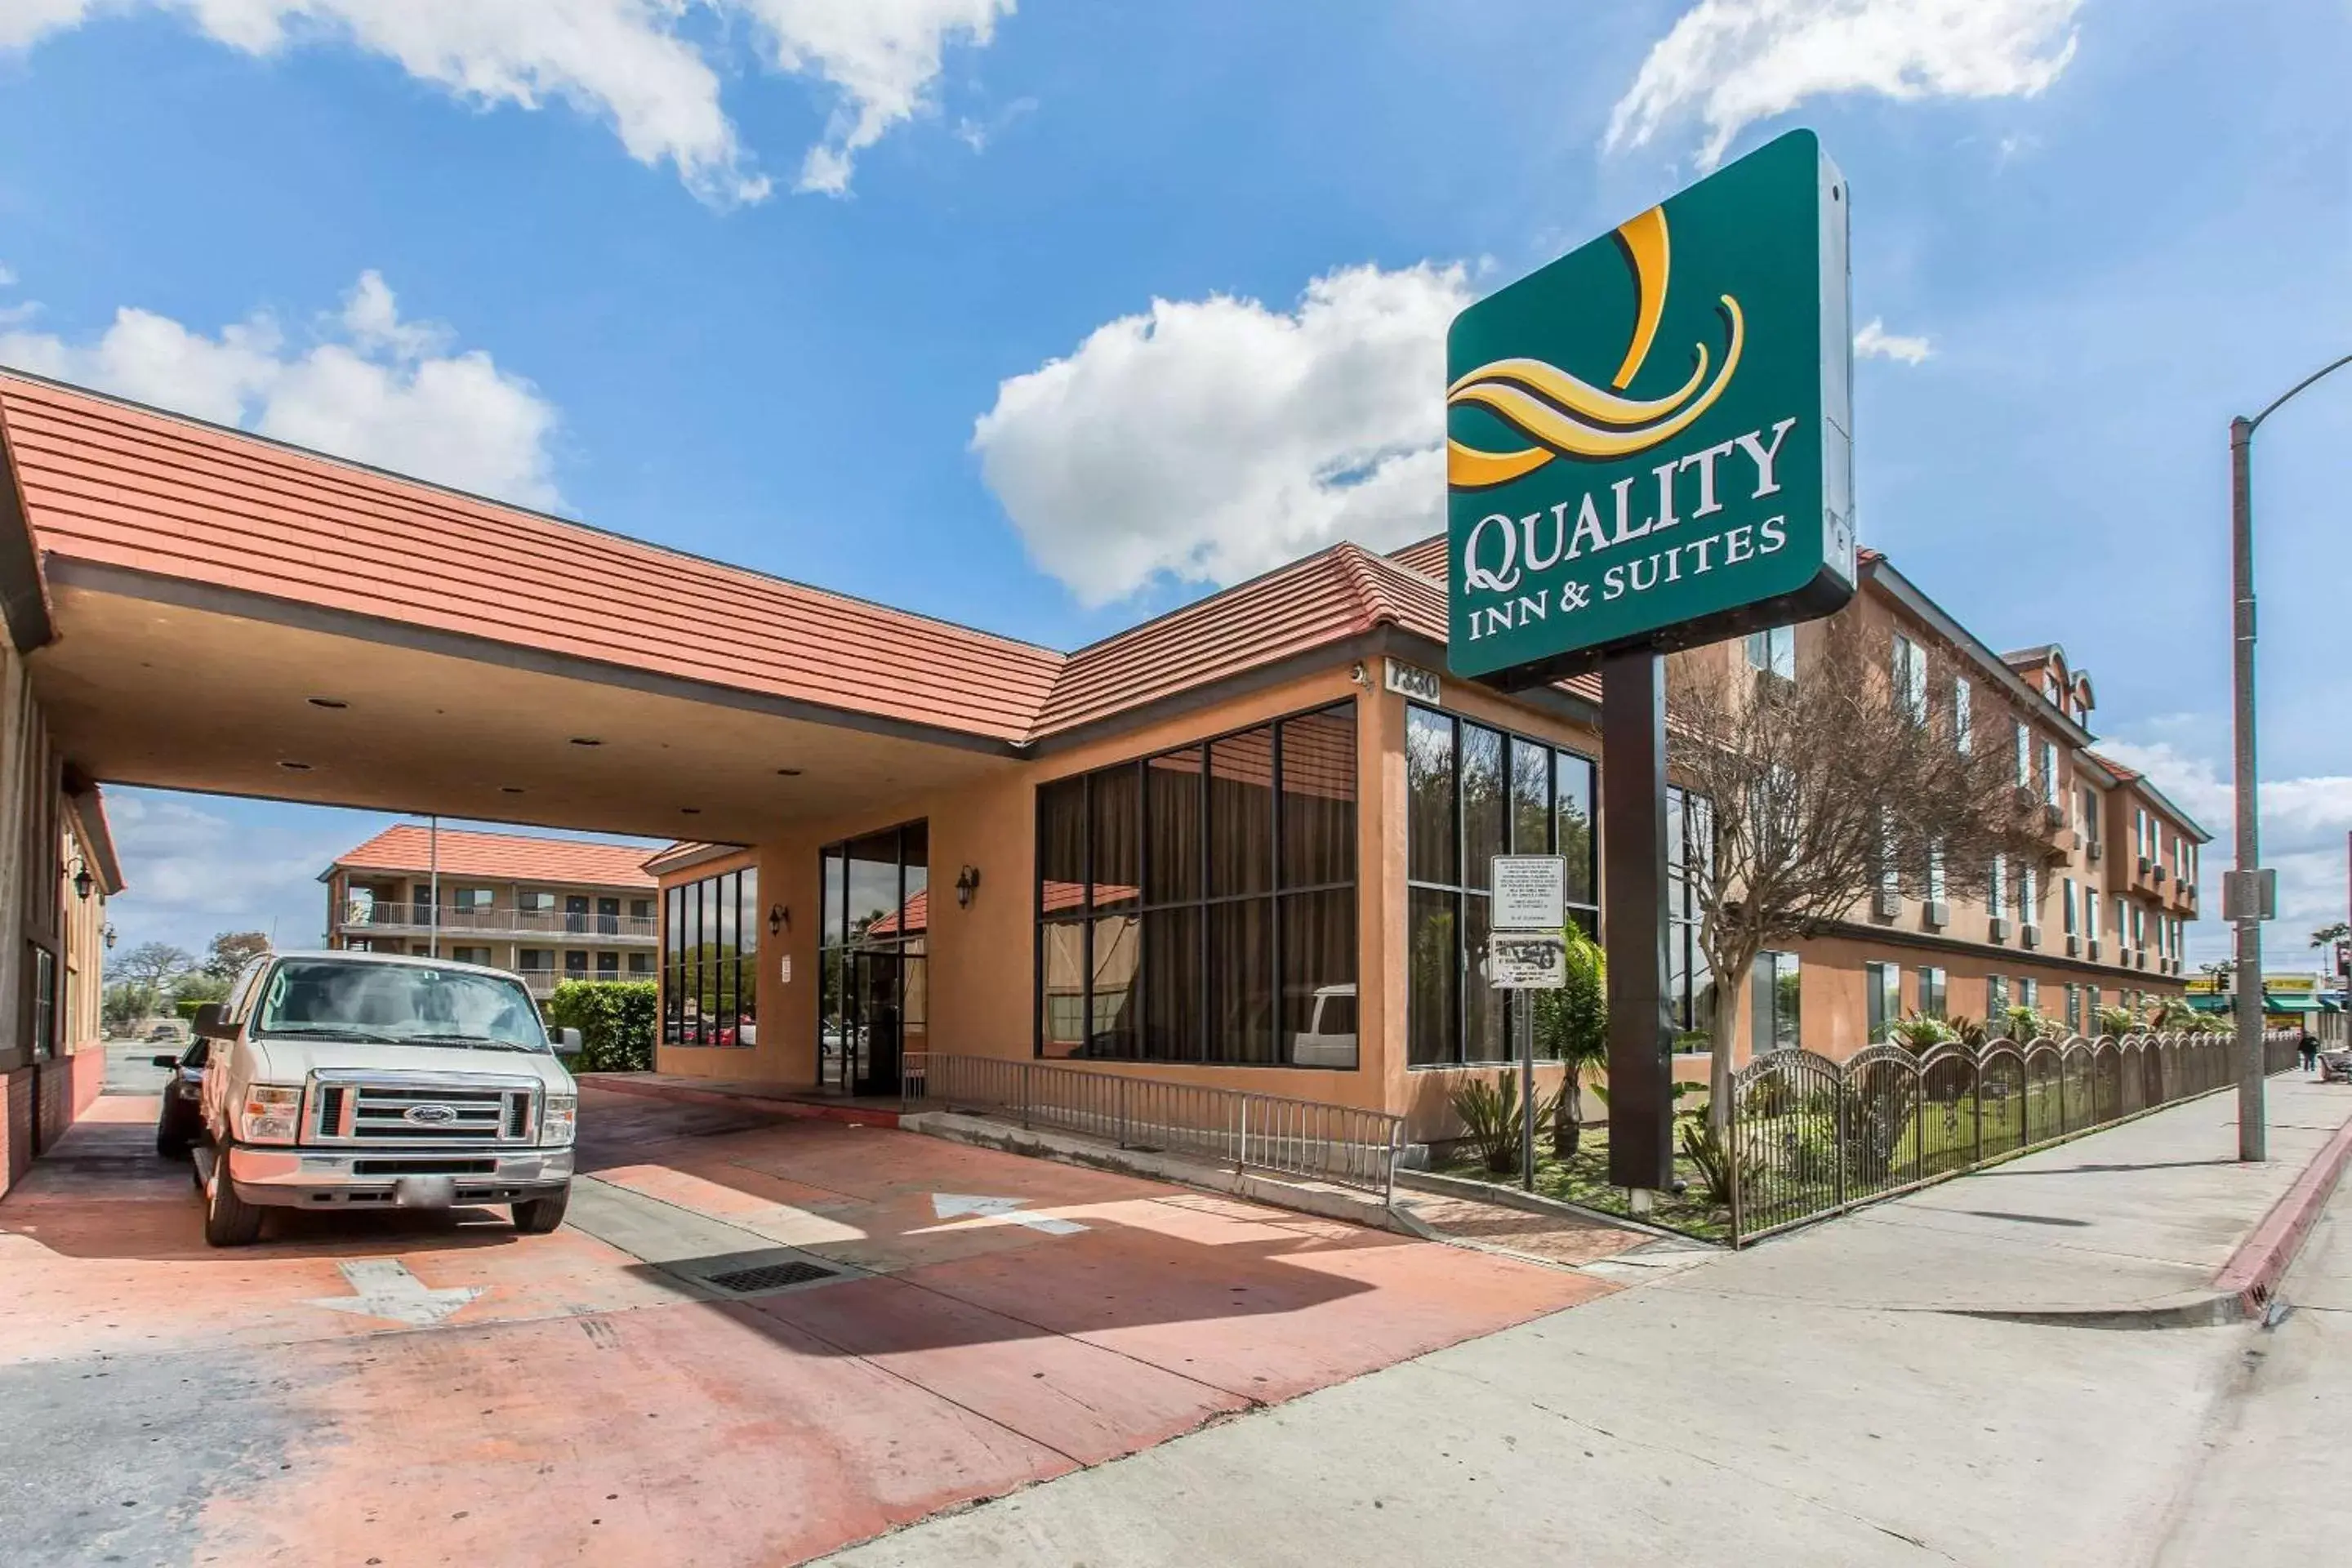 Property Building in Quality Inn & Suites Bell Gardens-Los Angeles